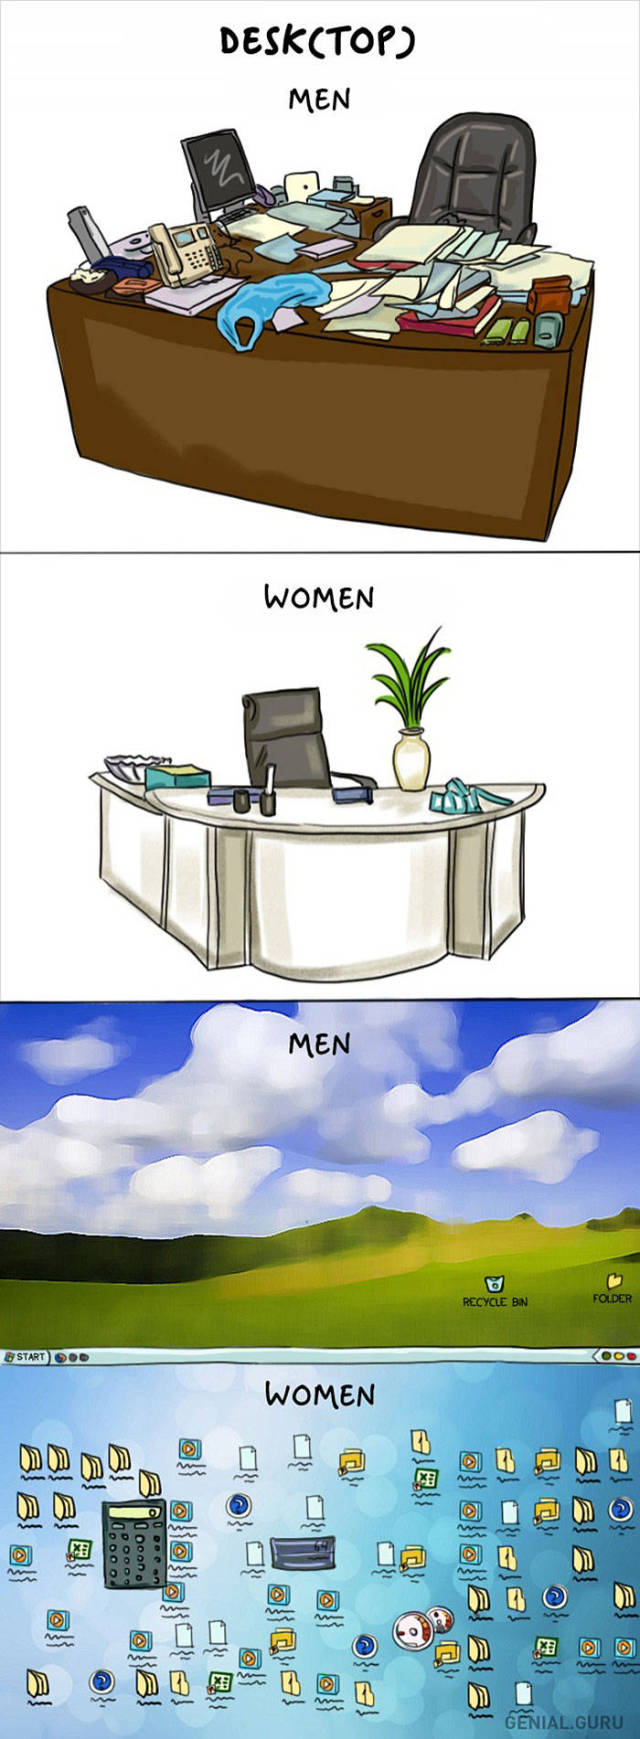 an_illustrated_guide_to_the_quirky_differences_between_men_and_women_640_high_13